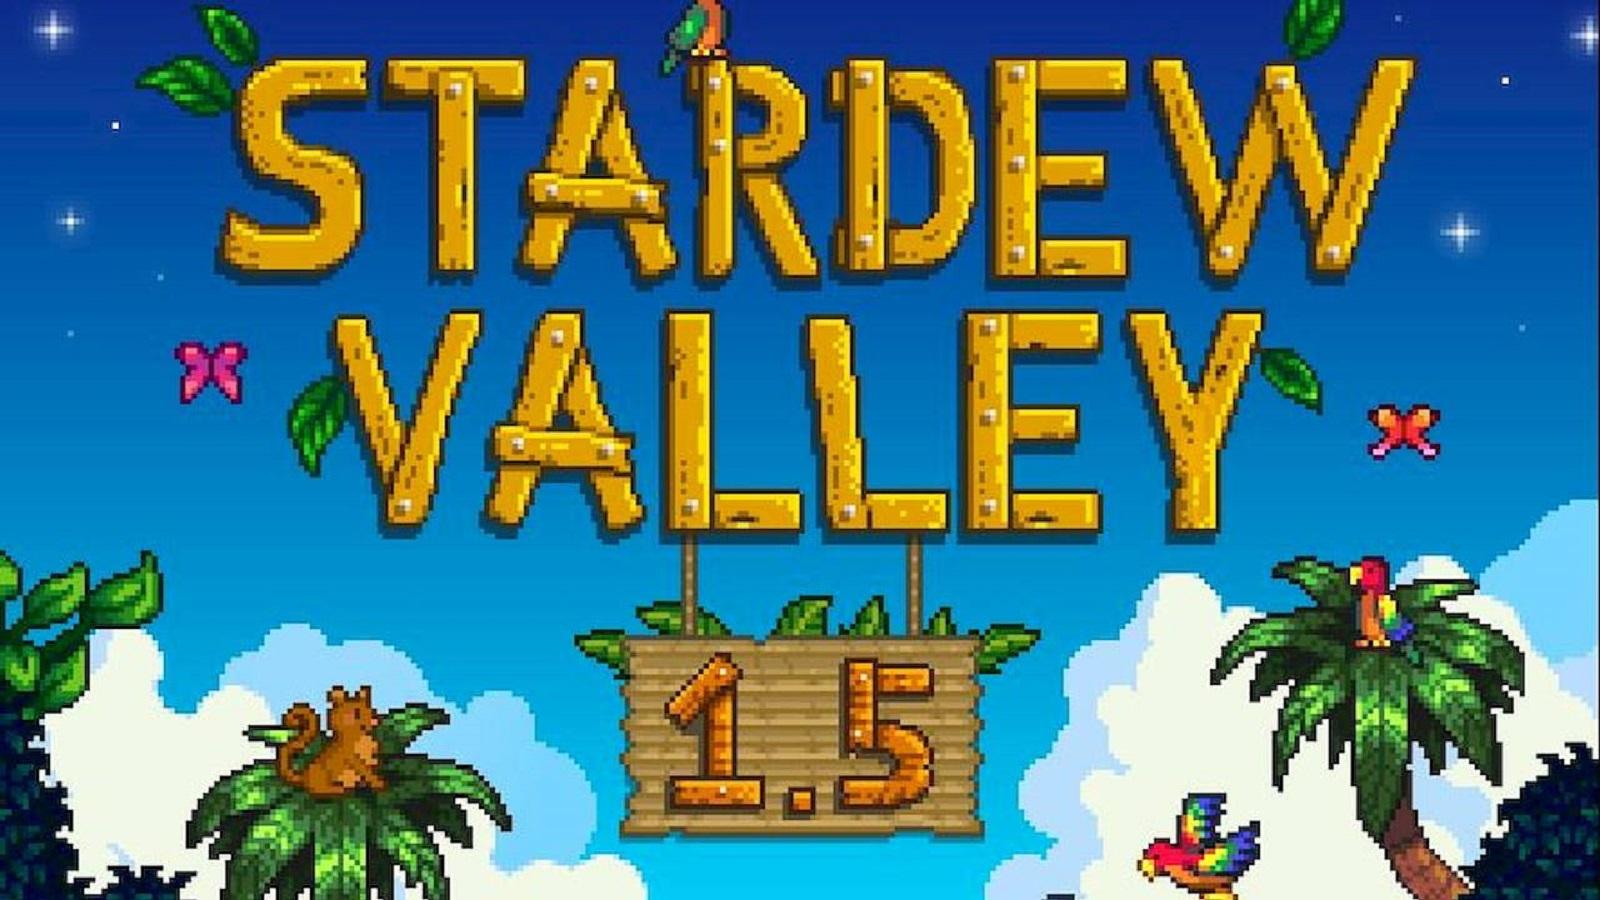 Stardew Valley's iOS version is coming soon – but without multiplayer